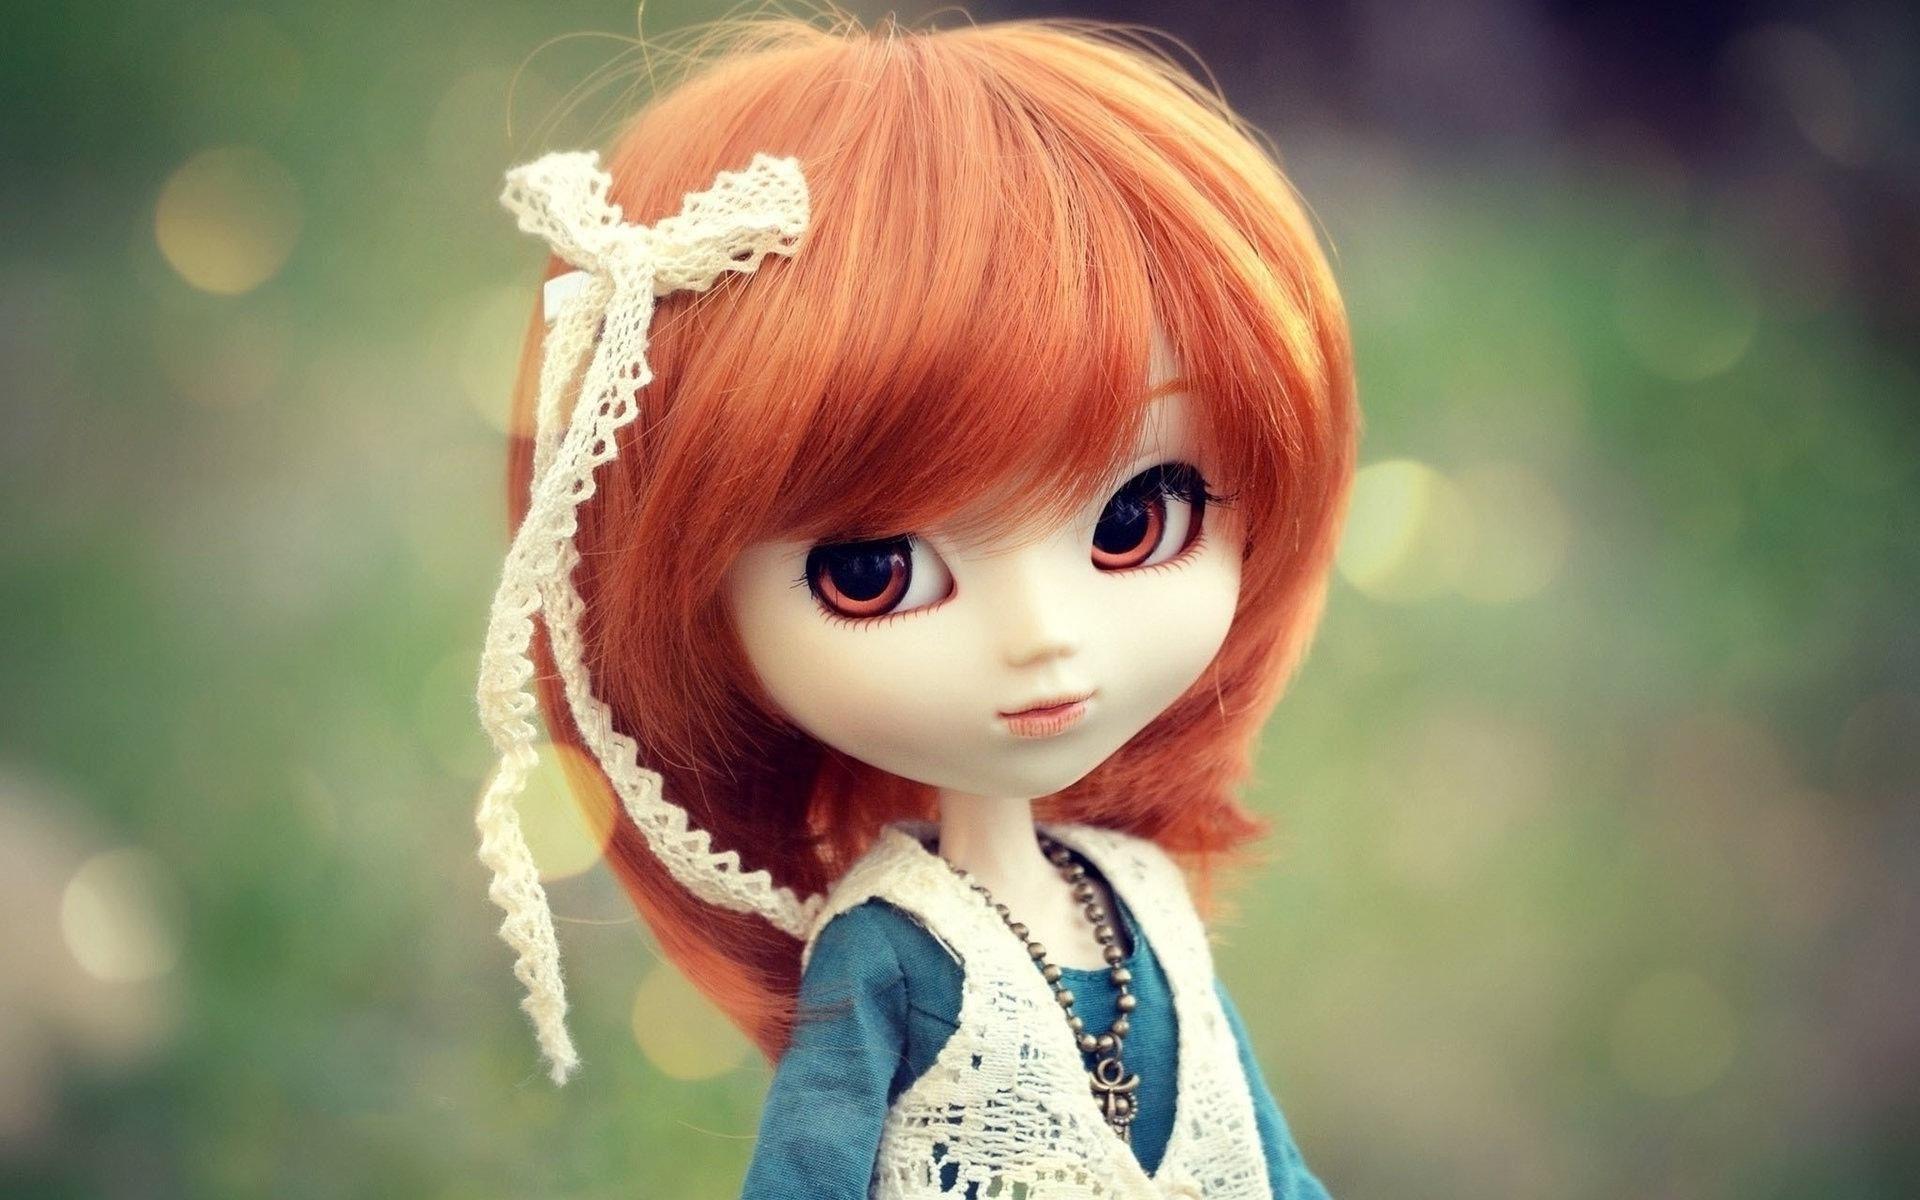 Cute Doll Wallpapers In HD - Wallpaper Cave